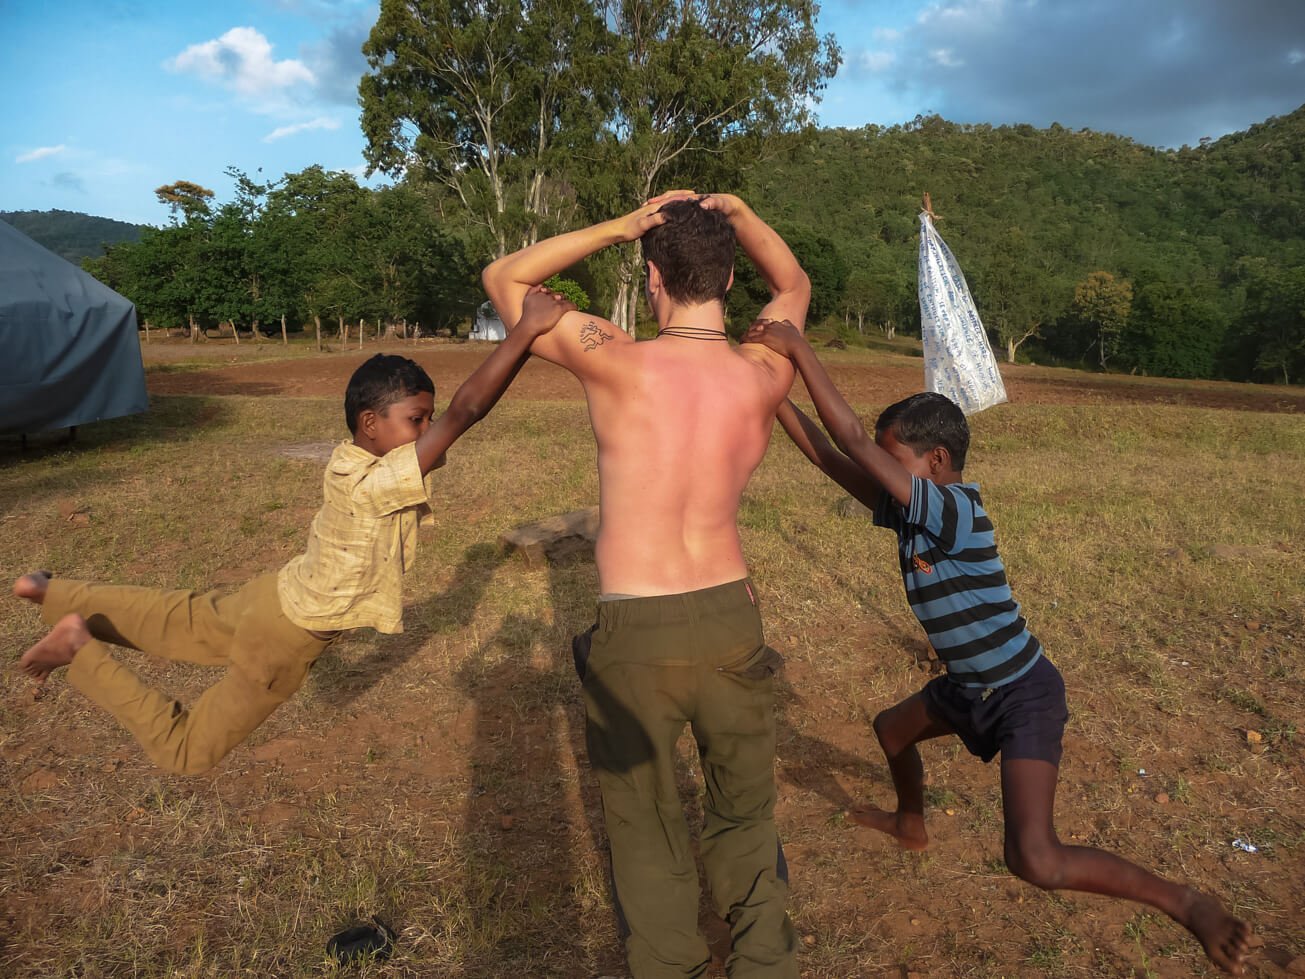 shirtless man volunteering in rural india with two kids swinging on his arms